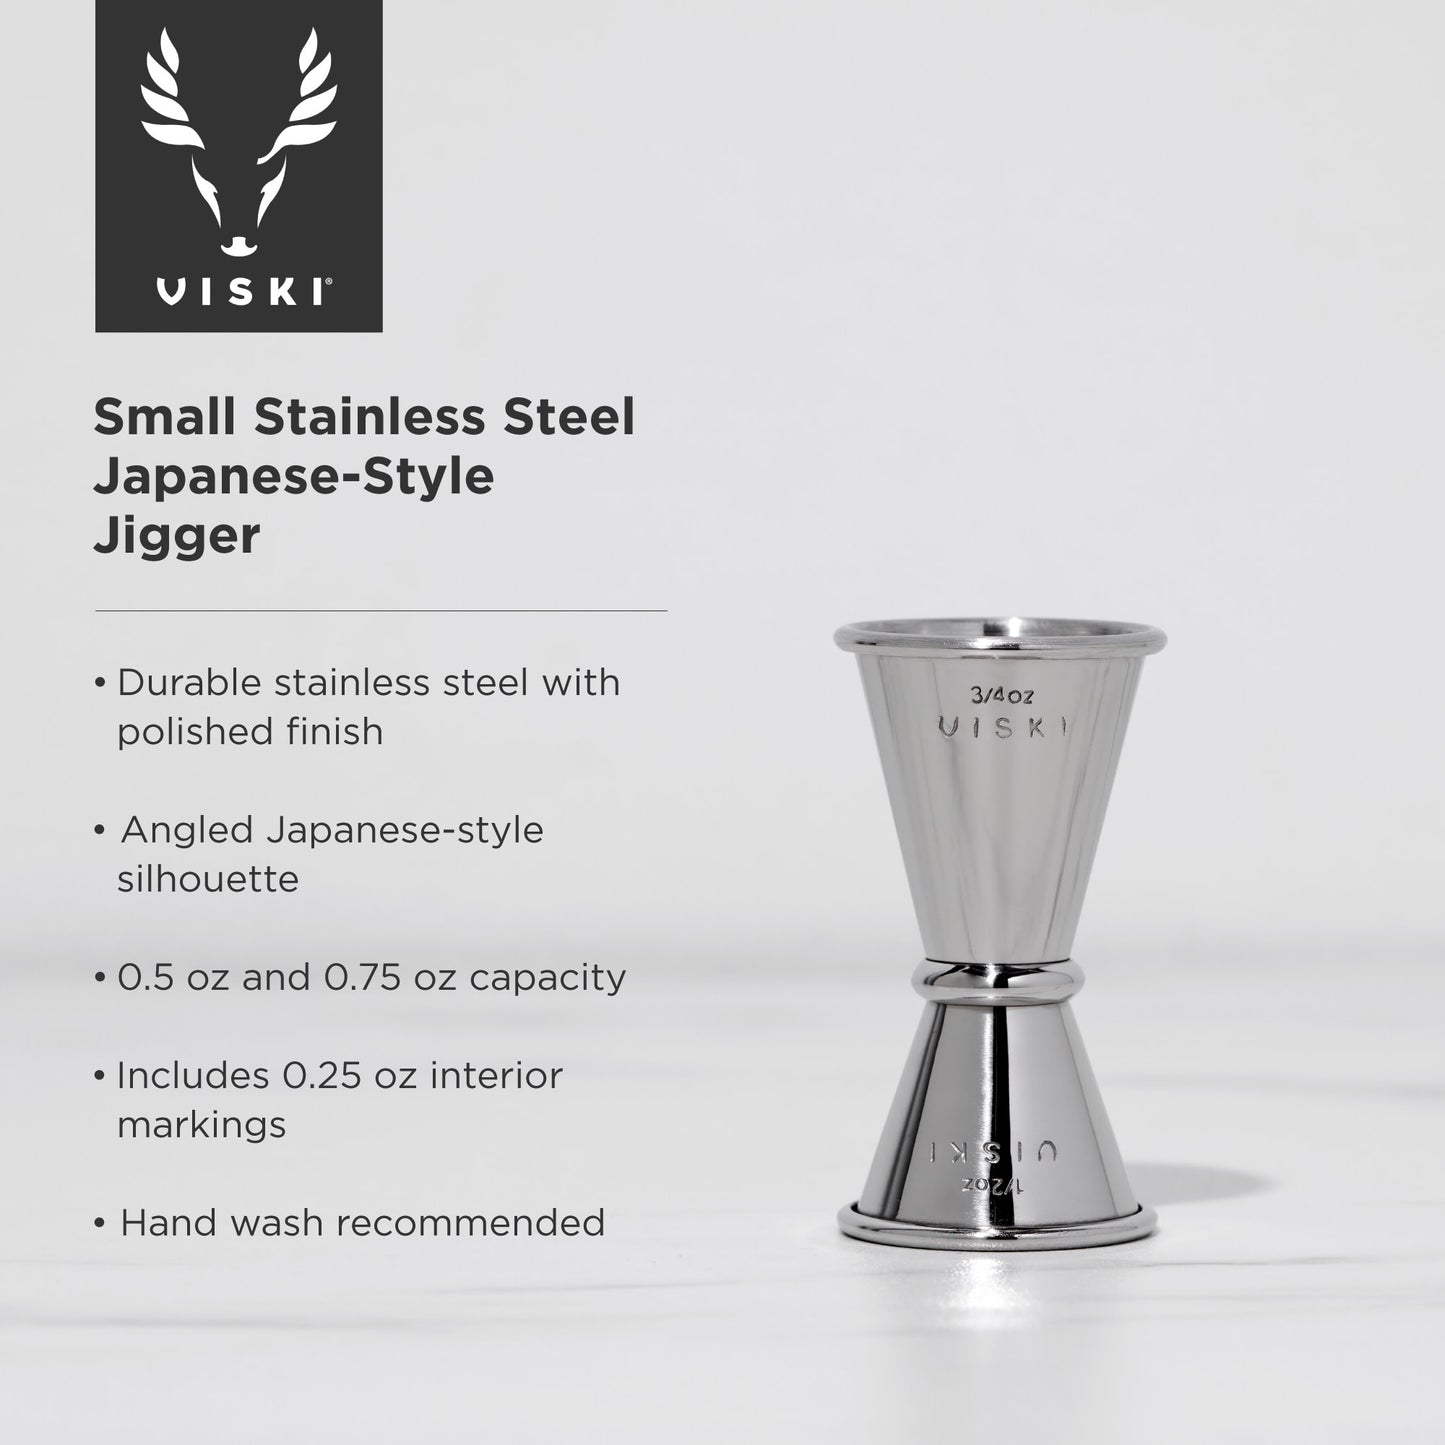 Small Stainless Steel Japanese Style Jigger